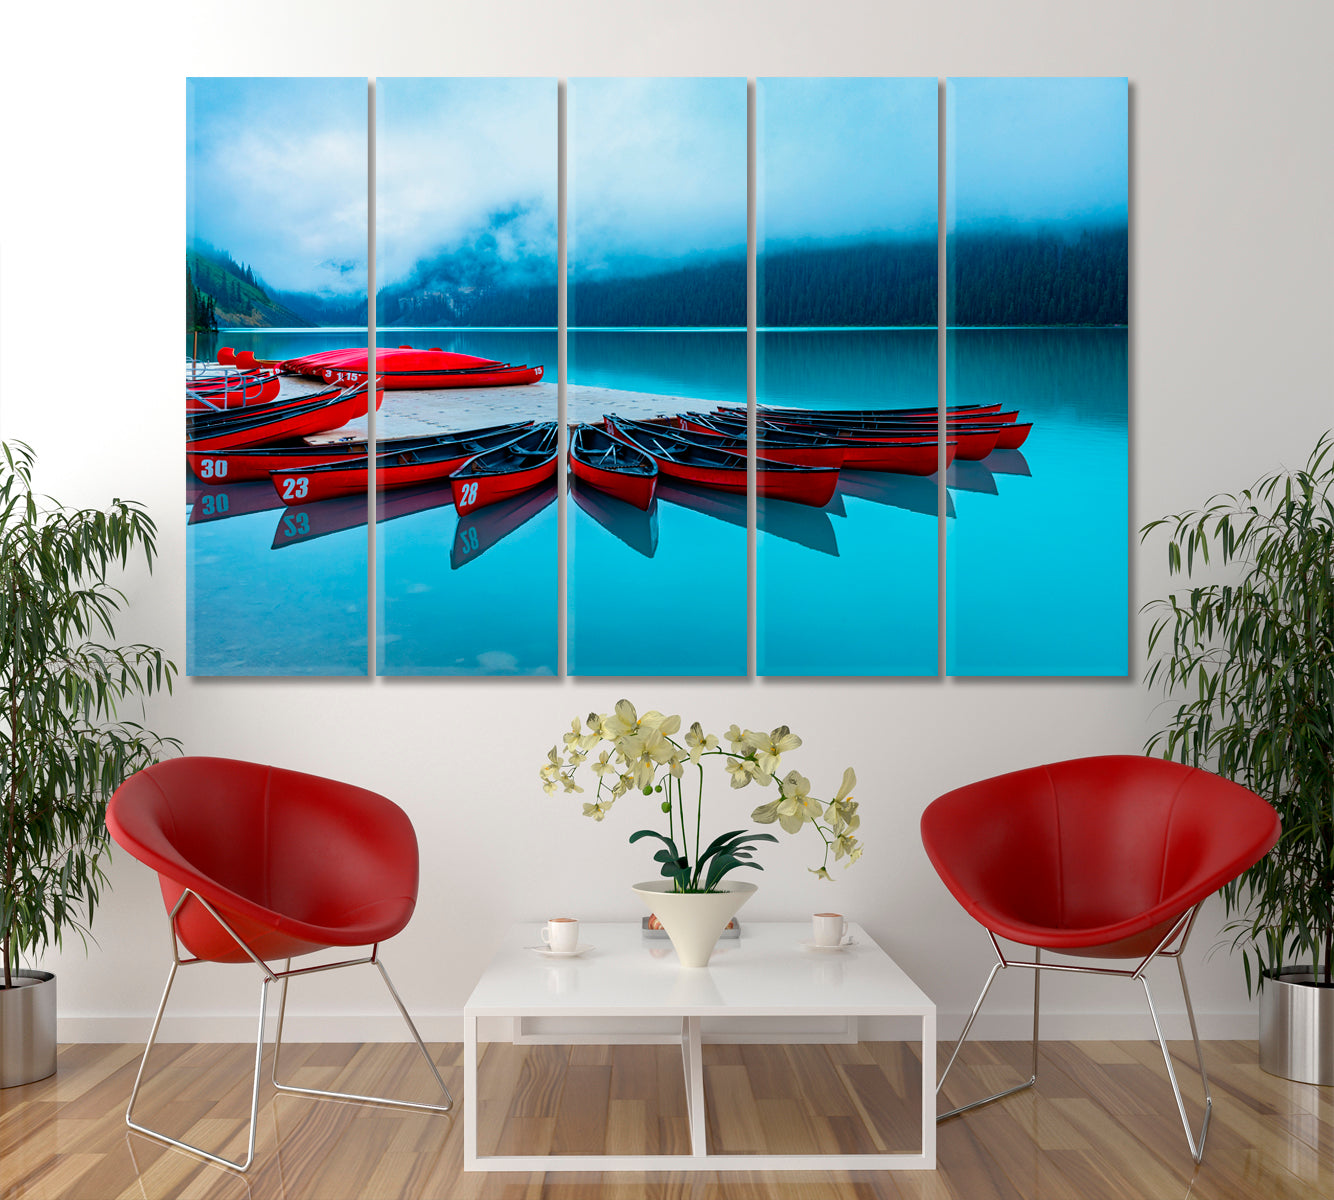 Red Canoes Turquoise Crystal Water Alberta Canada Foggy Lake Louise Scenery Landscape Fine Art Print Artesty 5 panels 36" x 24" 